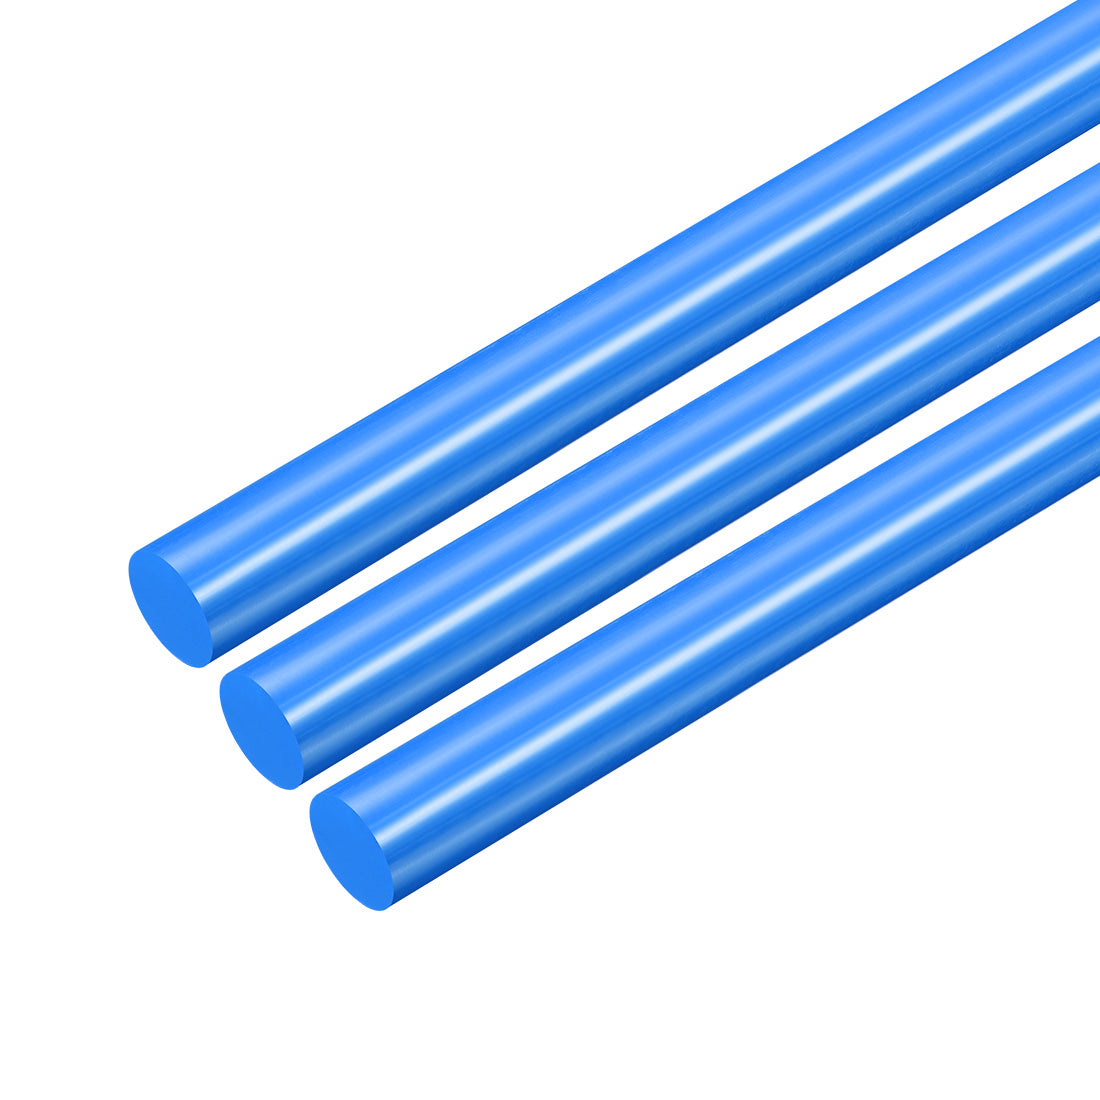 uxcell Uxcell Plastic Round Rod,8mm Dia 50cm Blue Engineering Plastic Round Bar 3pcs